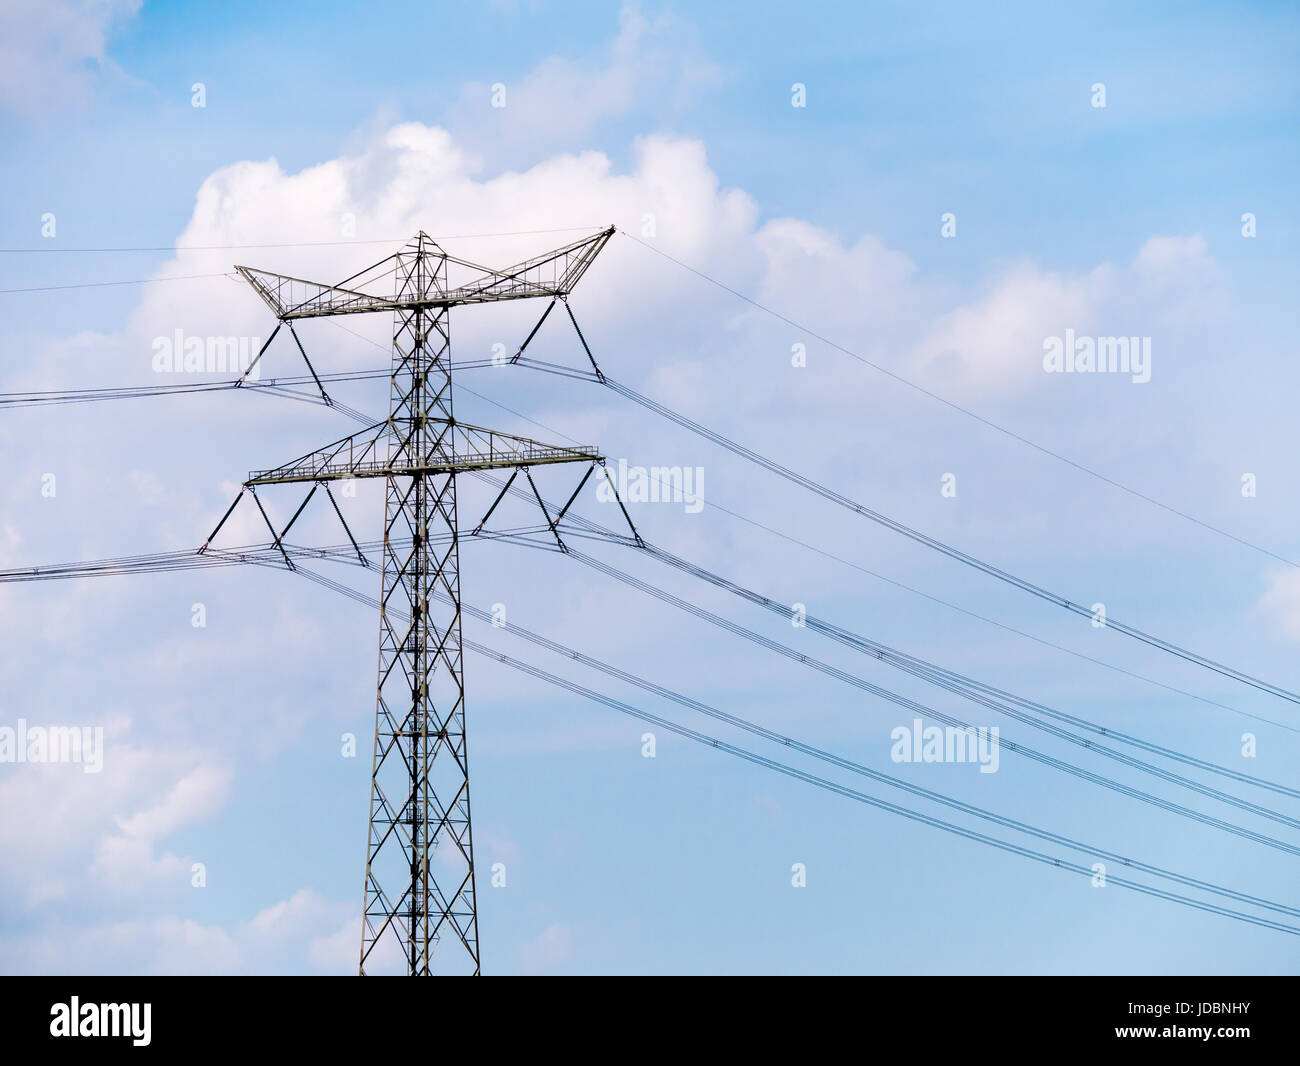 High voltage electric power transmission lines and pylon for electricity transport, Netherlands Stock Photo